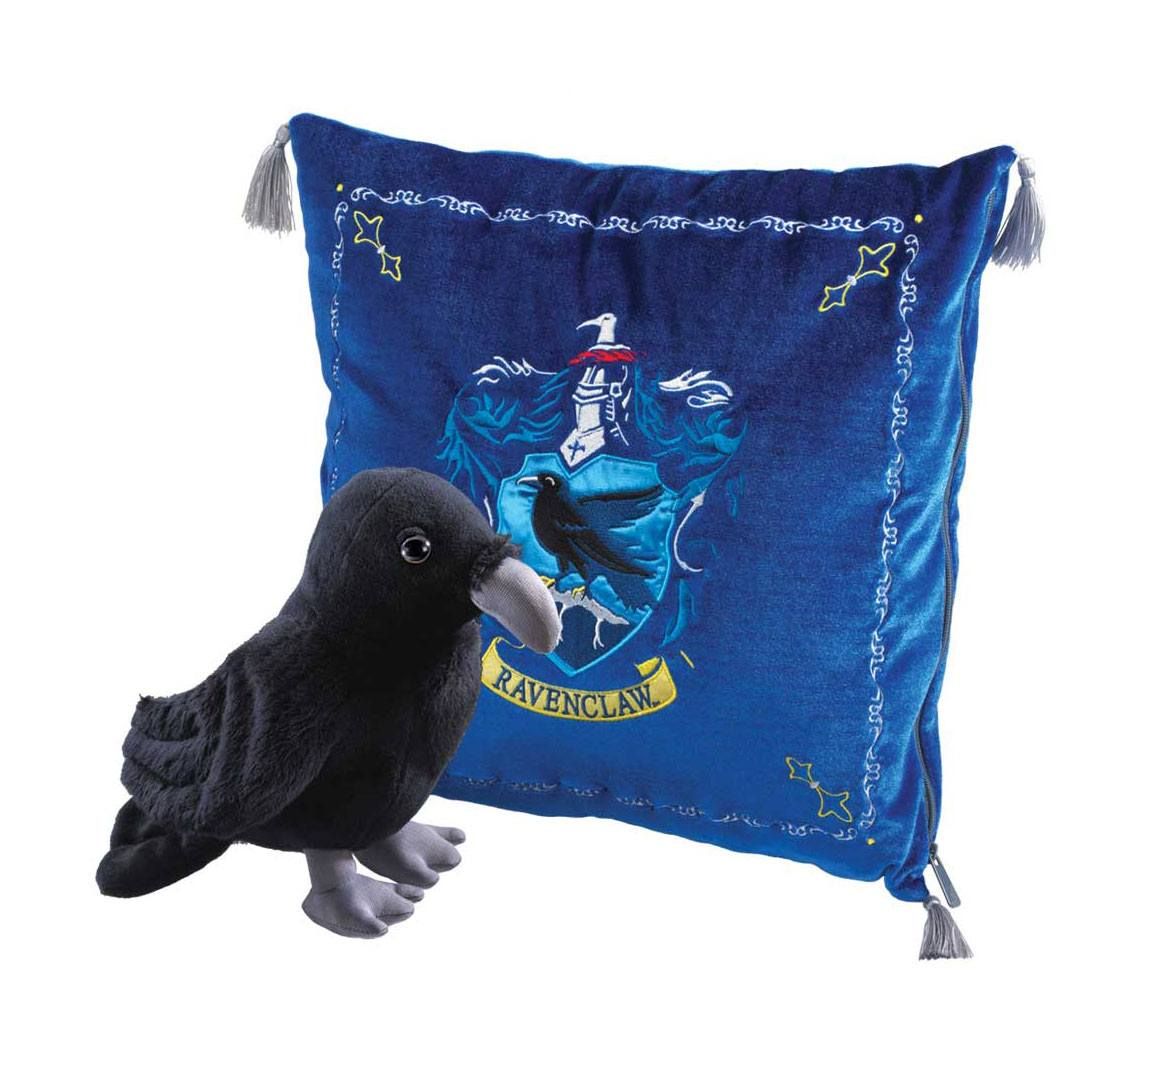 Harry Potter House Mascot Cushion with Plush Figure Ravenclaw Noble Collection